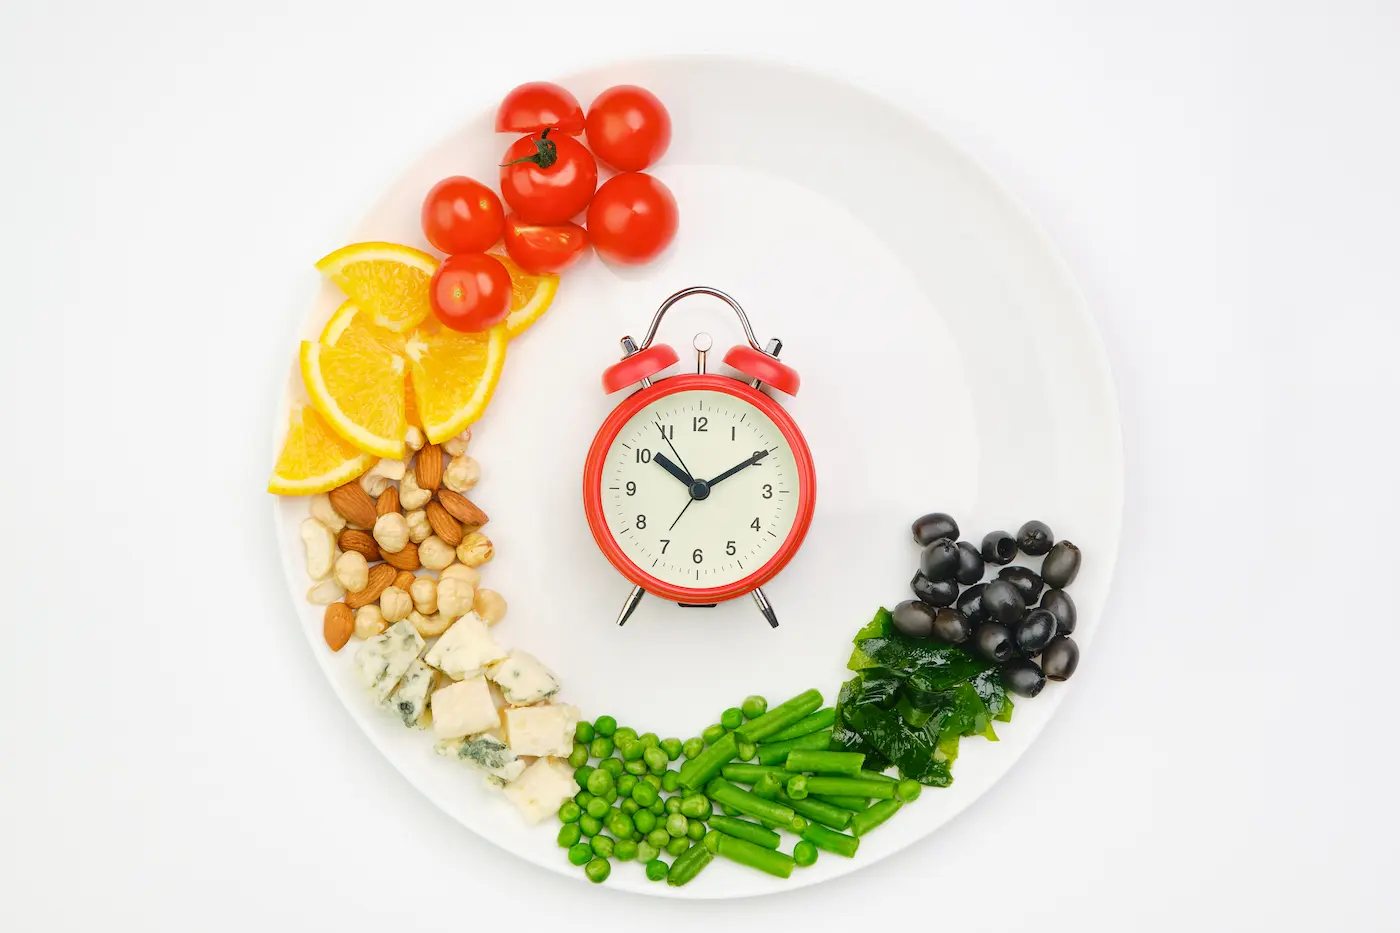 diet-and-lunchtime-intermittent-fasting-concept-2022-10-04-00-14-57-utc